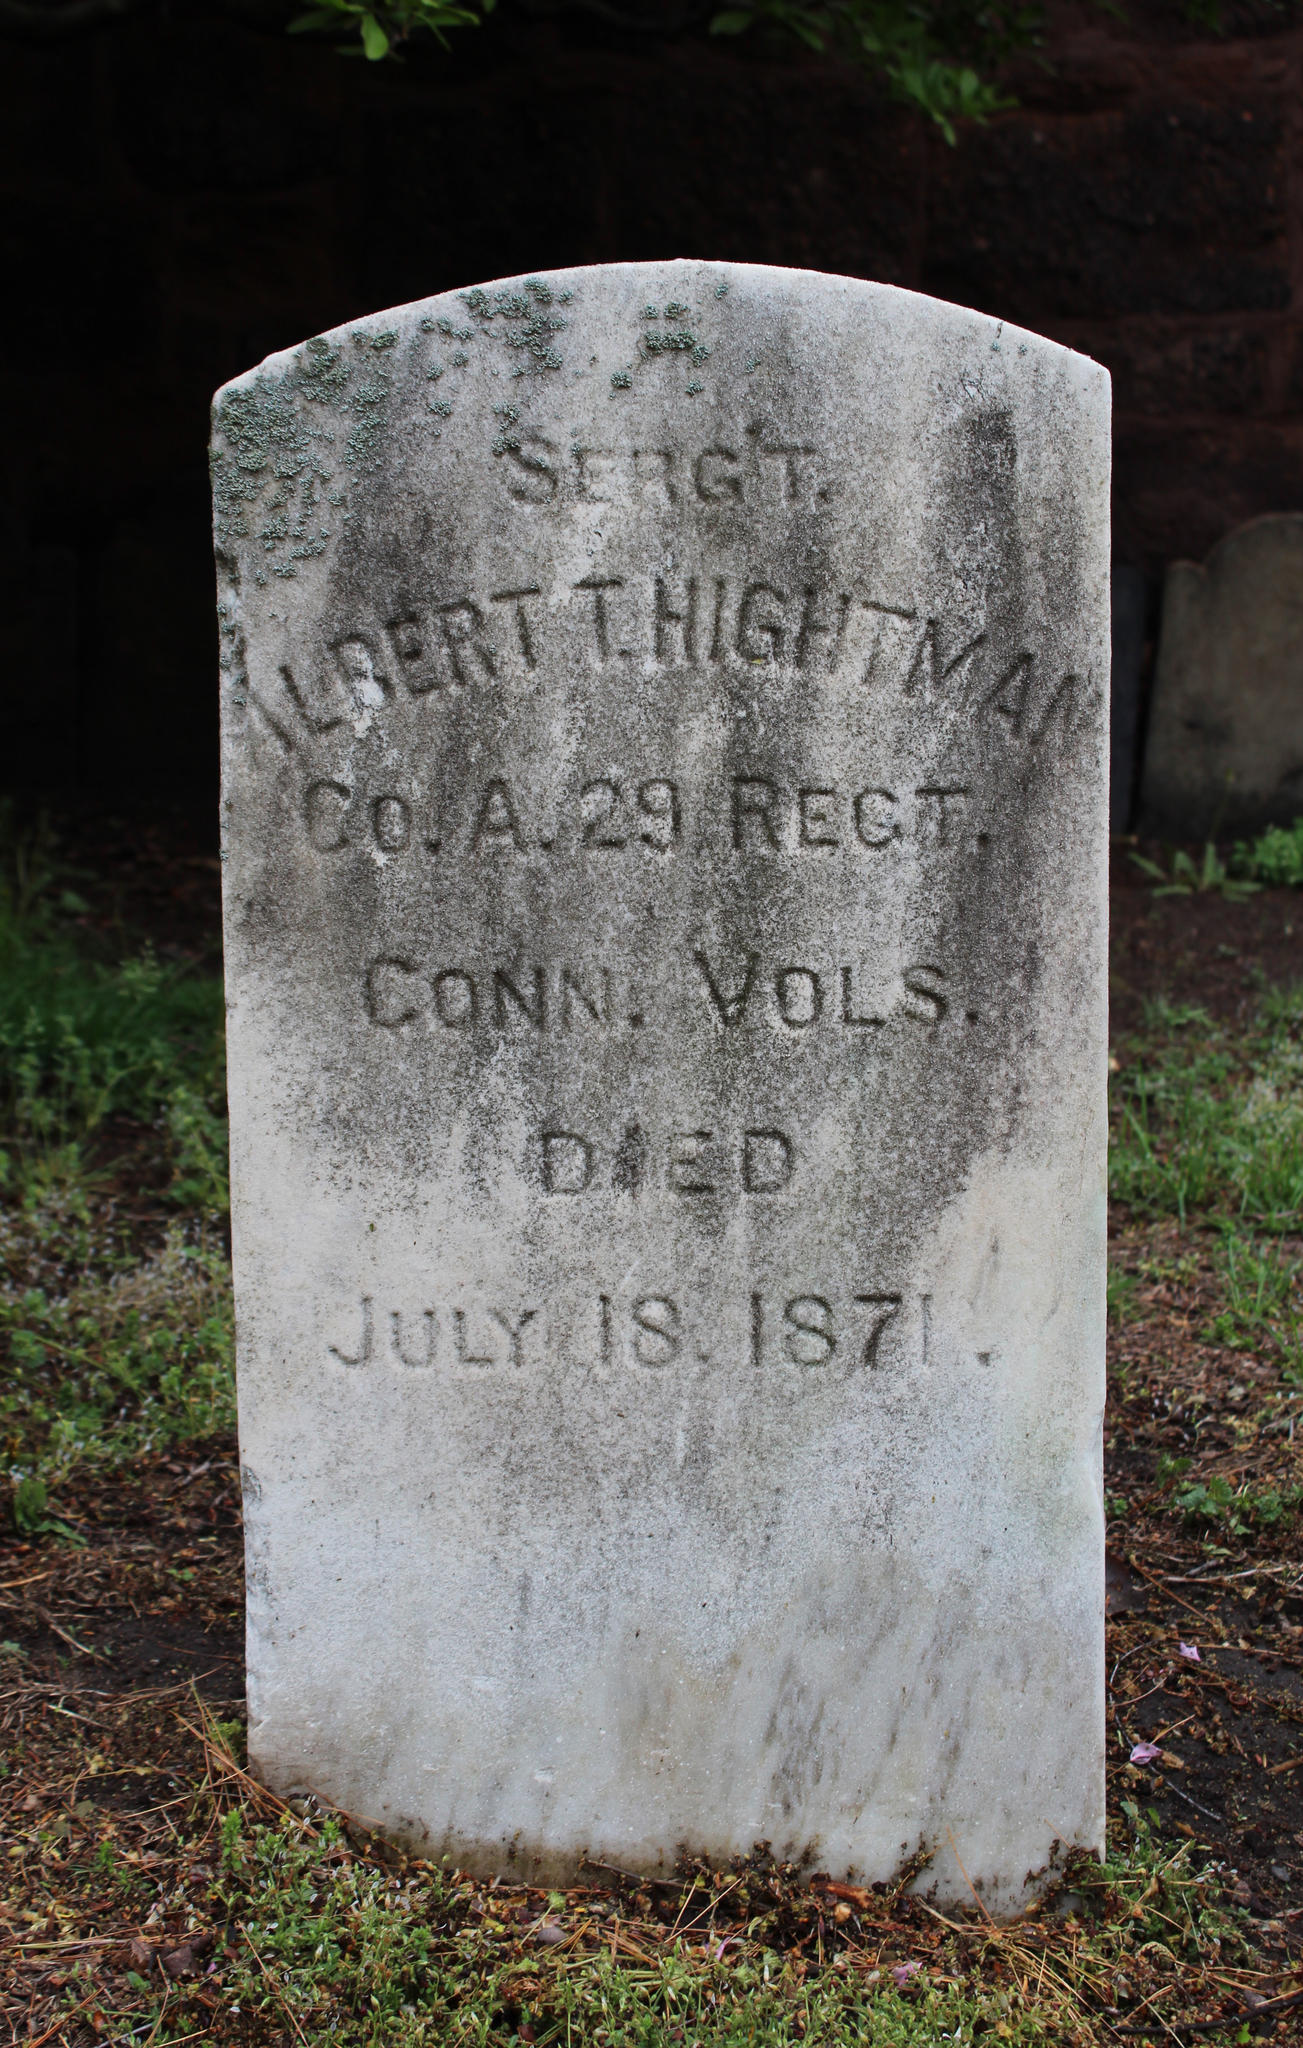 <span style="background-color:transparent">Hightman was a member of the 29th Connecticut Volunteers (Colored). The regiment, the first African-American Regiment formed in New Haven, saw action in Virginia and in 1865 participated in the final capture of Richmond. In 2008, a memorial to the 29th was established in Criscuolo Park on Chapel Street in New Haven. </span><span><span style="background-color:transparent">Location: Ivy</span></span> 